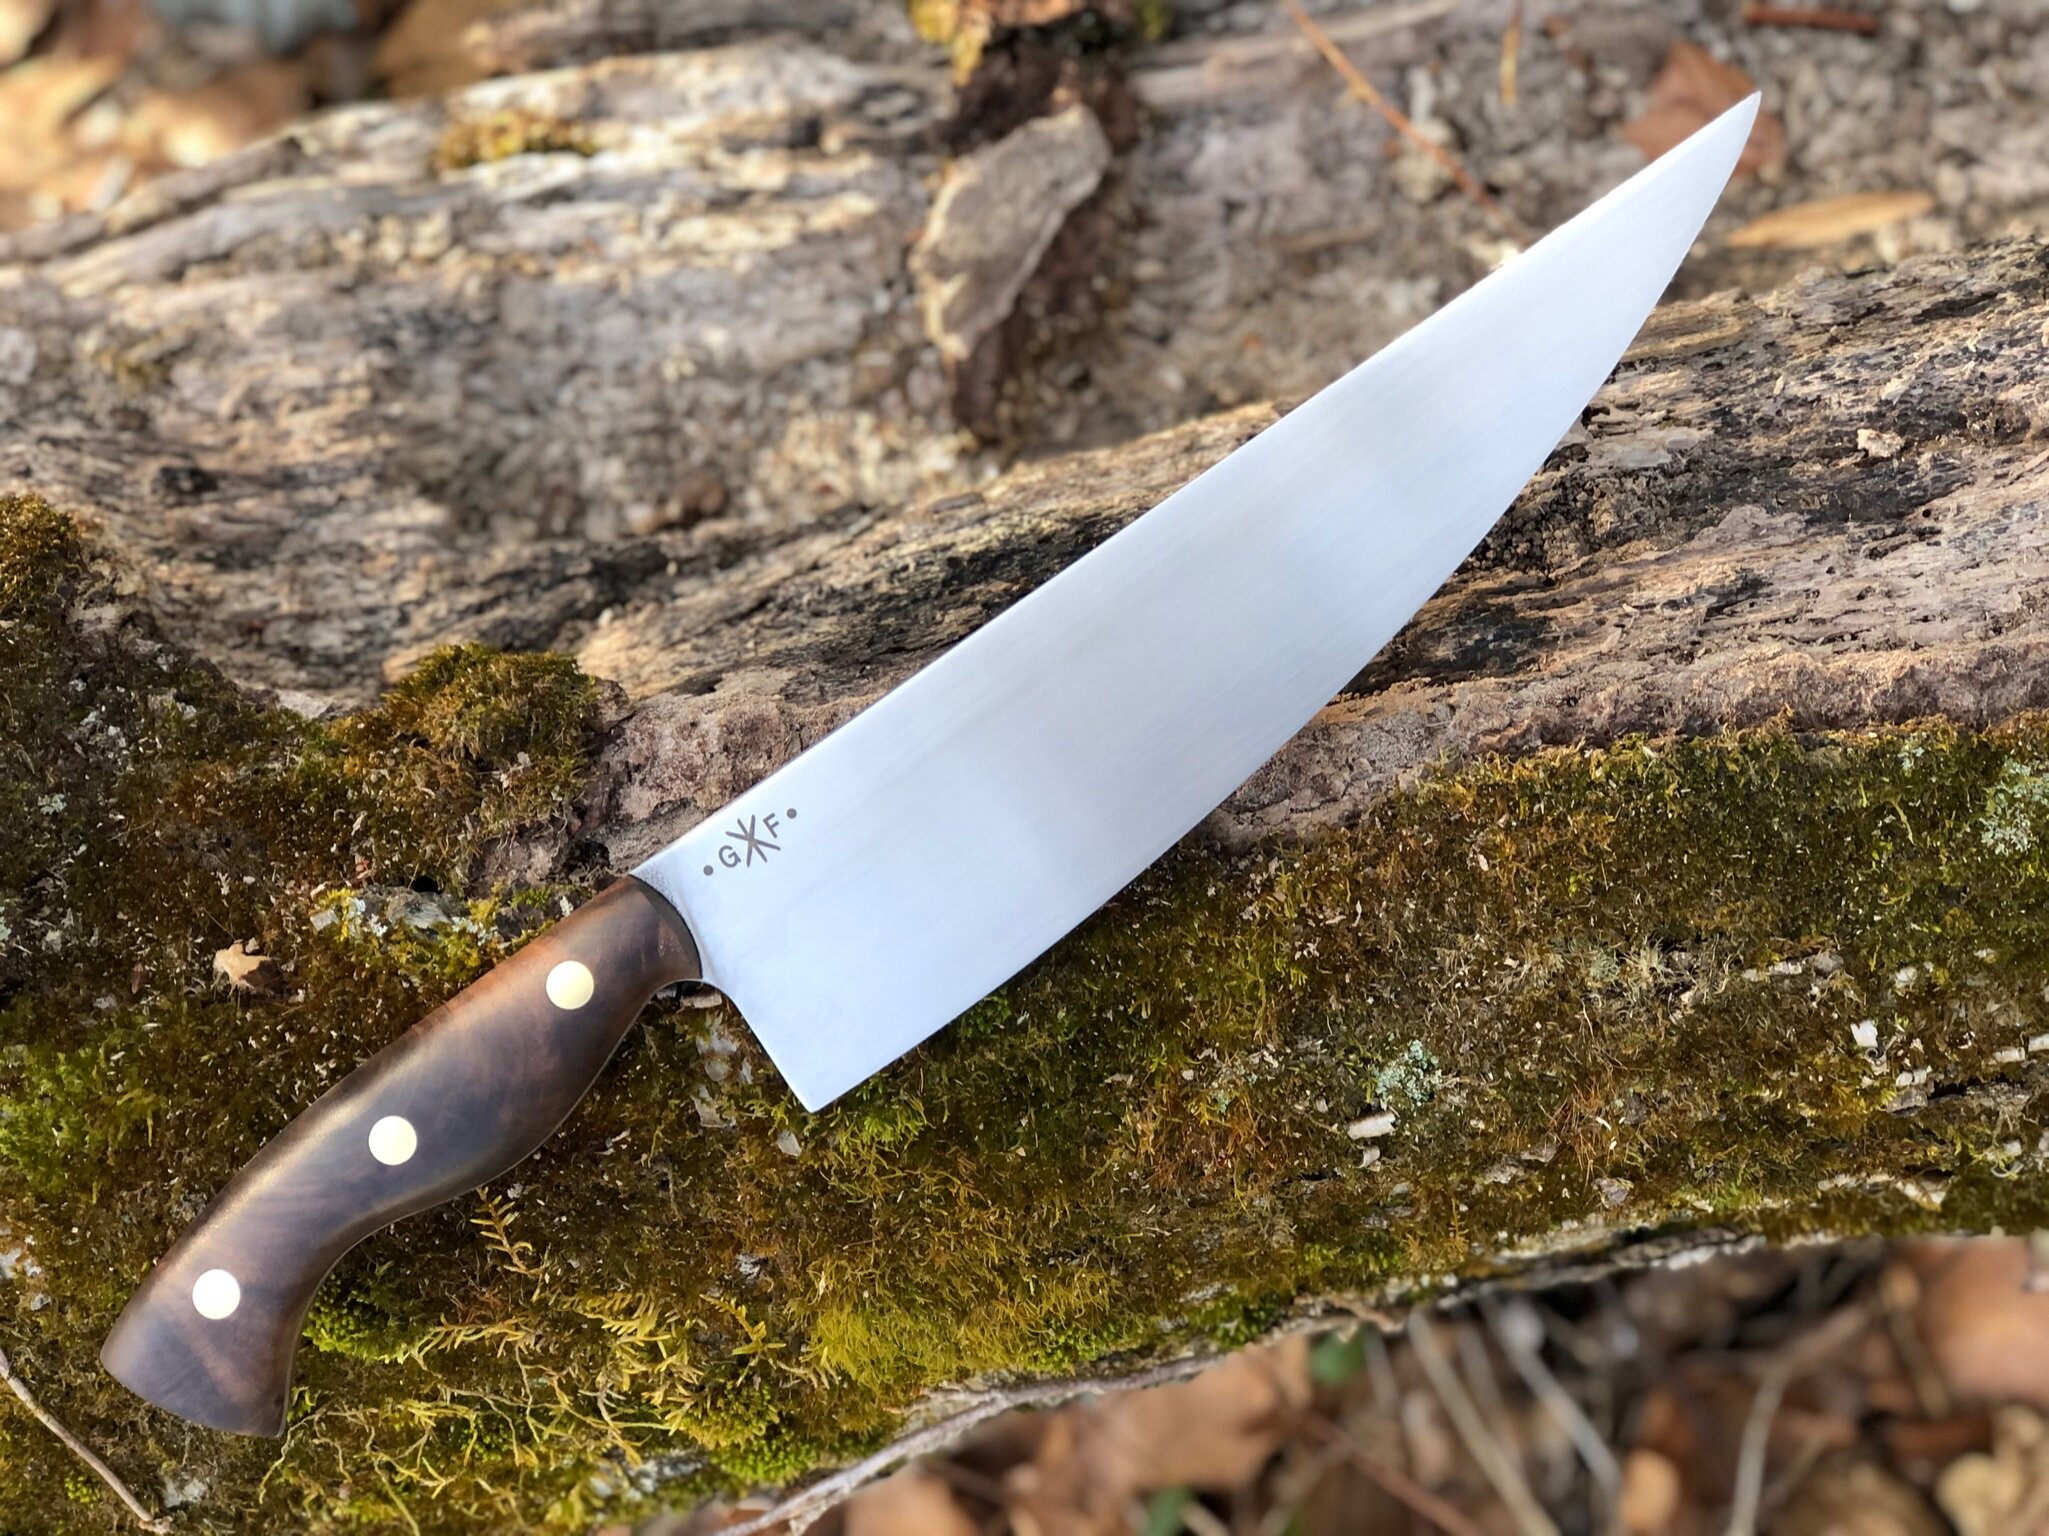 Chef's Knife - Classic French Style with g10 handle — Feder knives